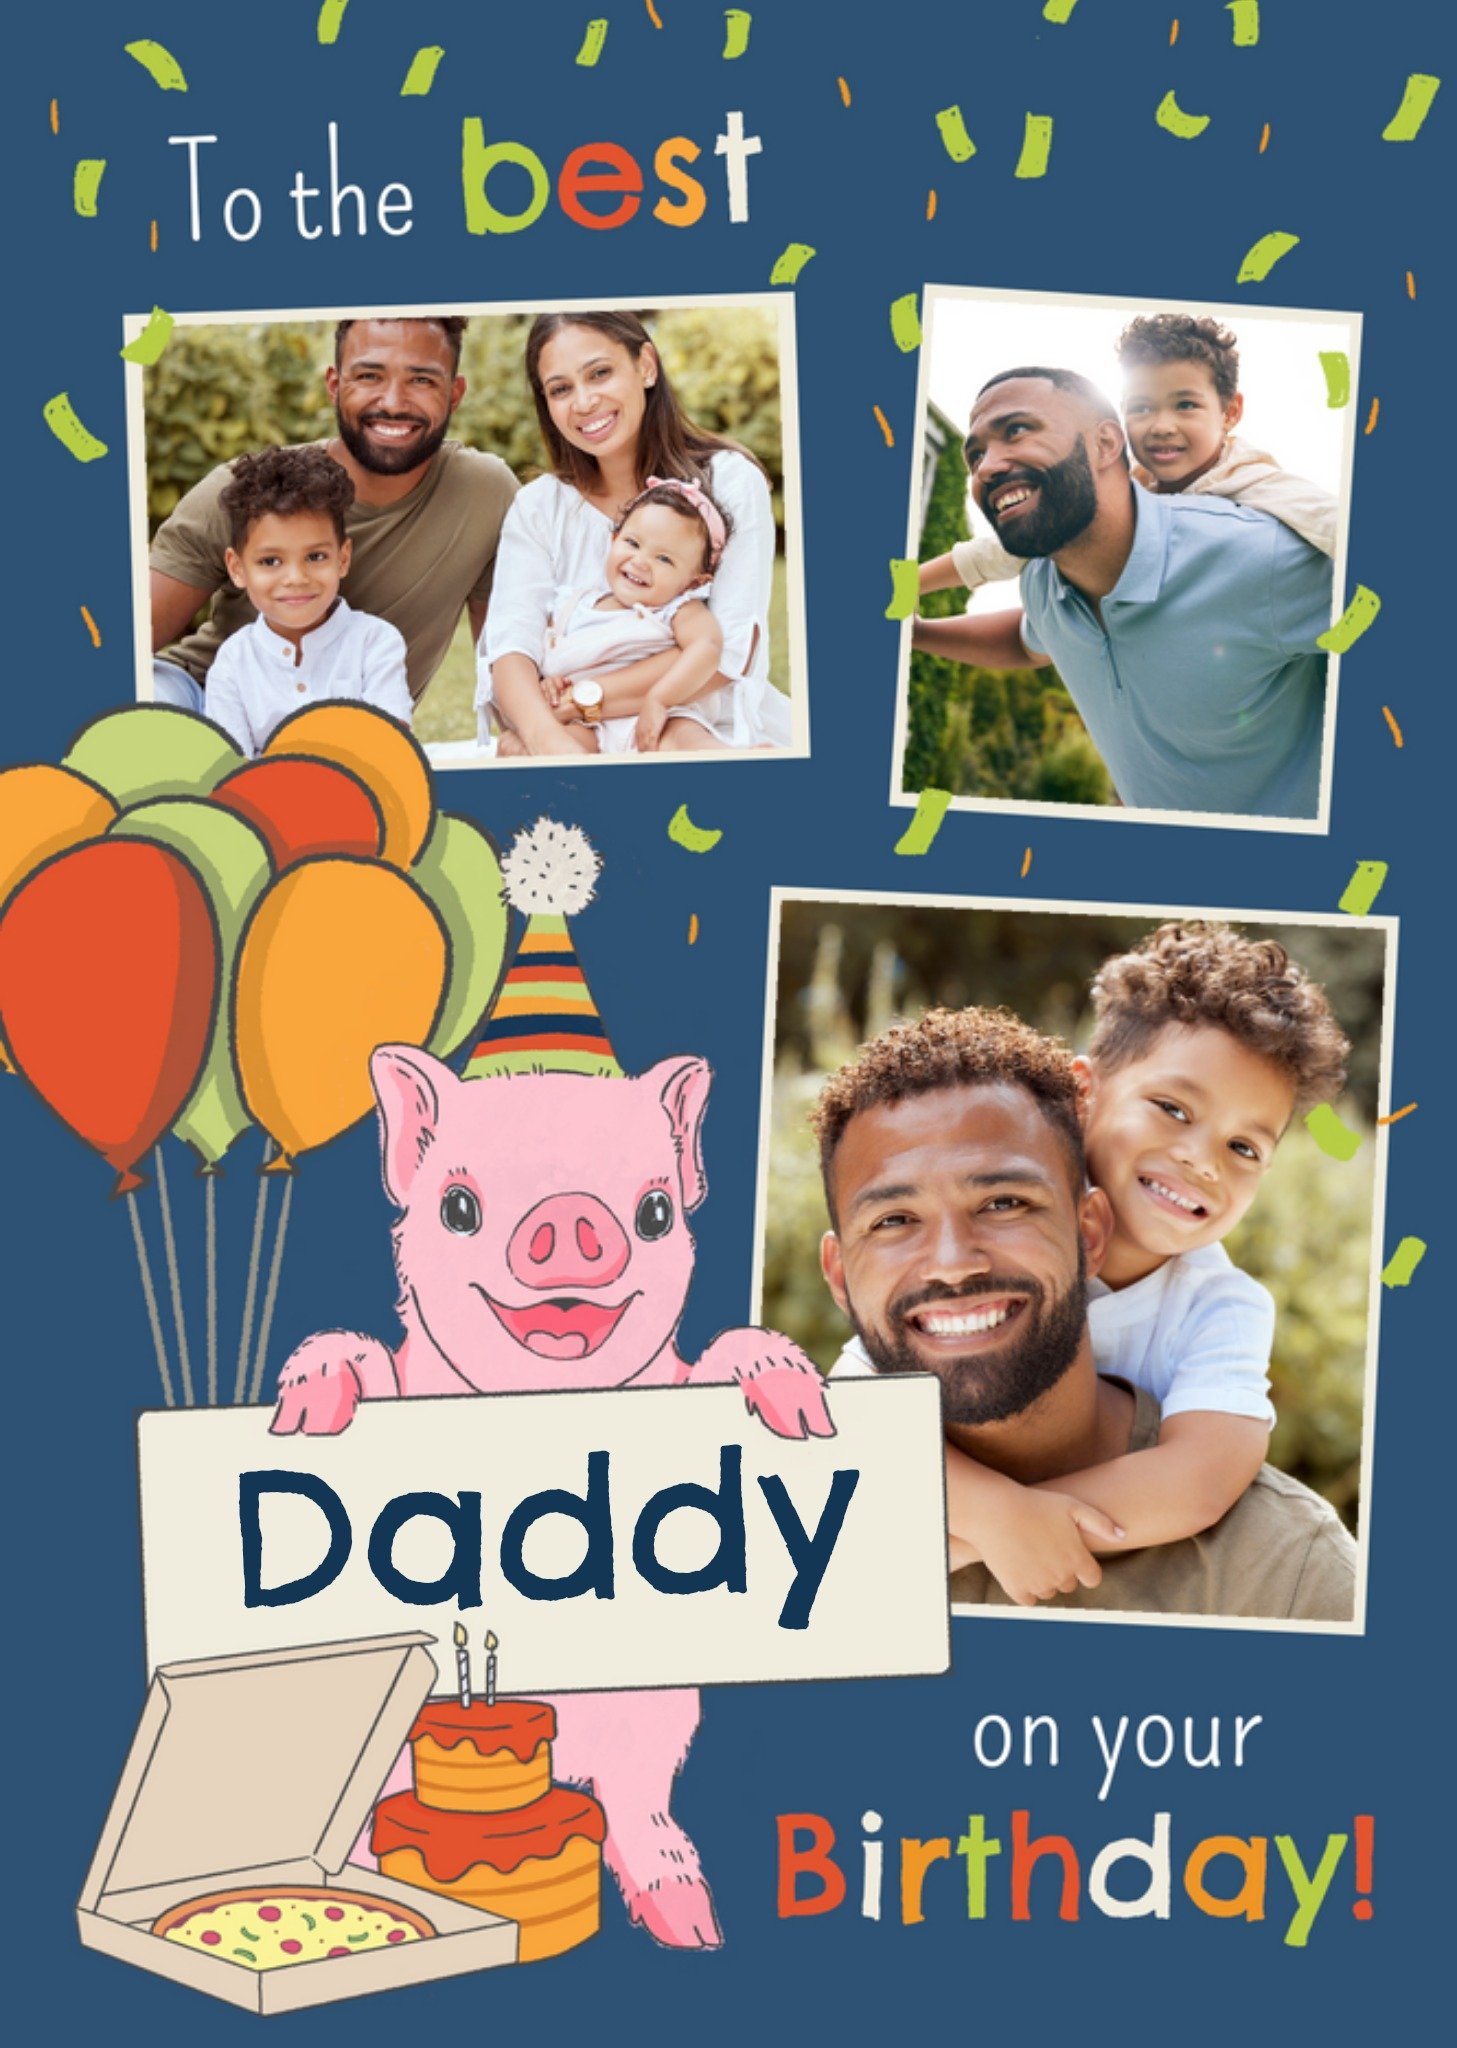 Moonpig Exclusive To The Best Daddy Photo Upload Birthday Card, Large